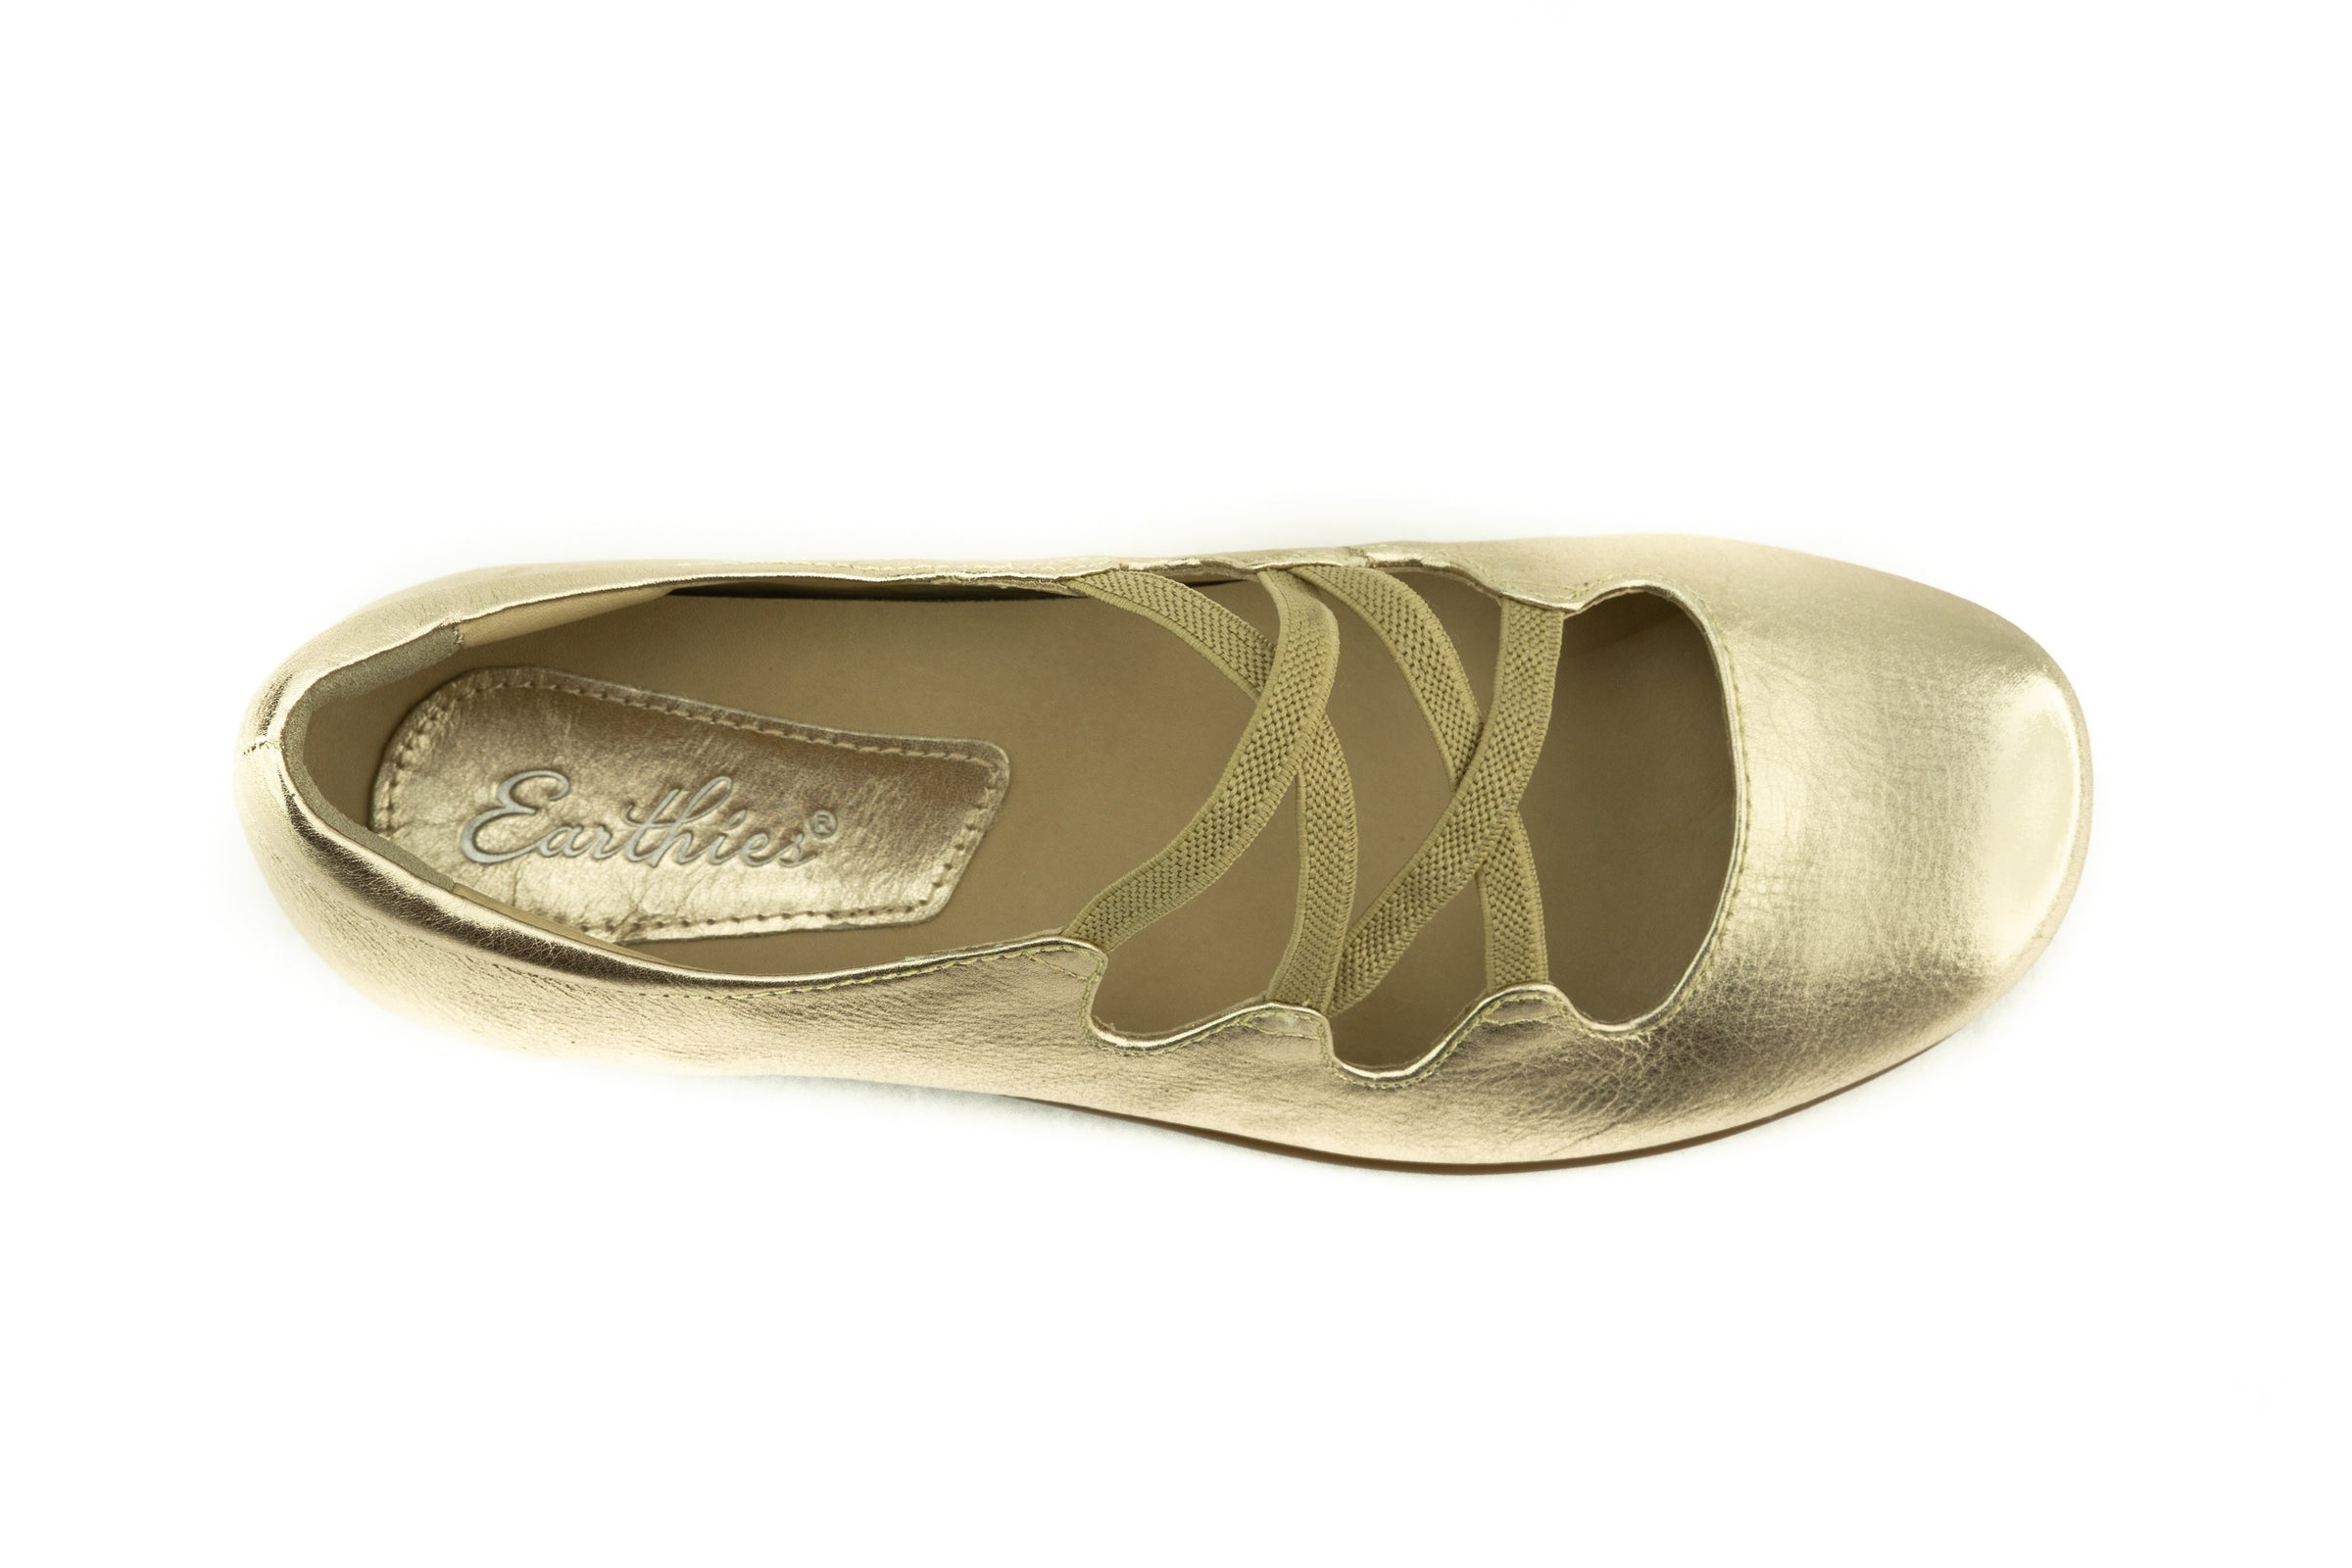 Earth Clare Leather Flat